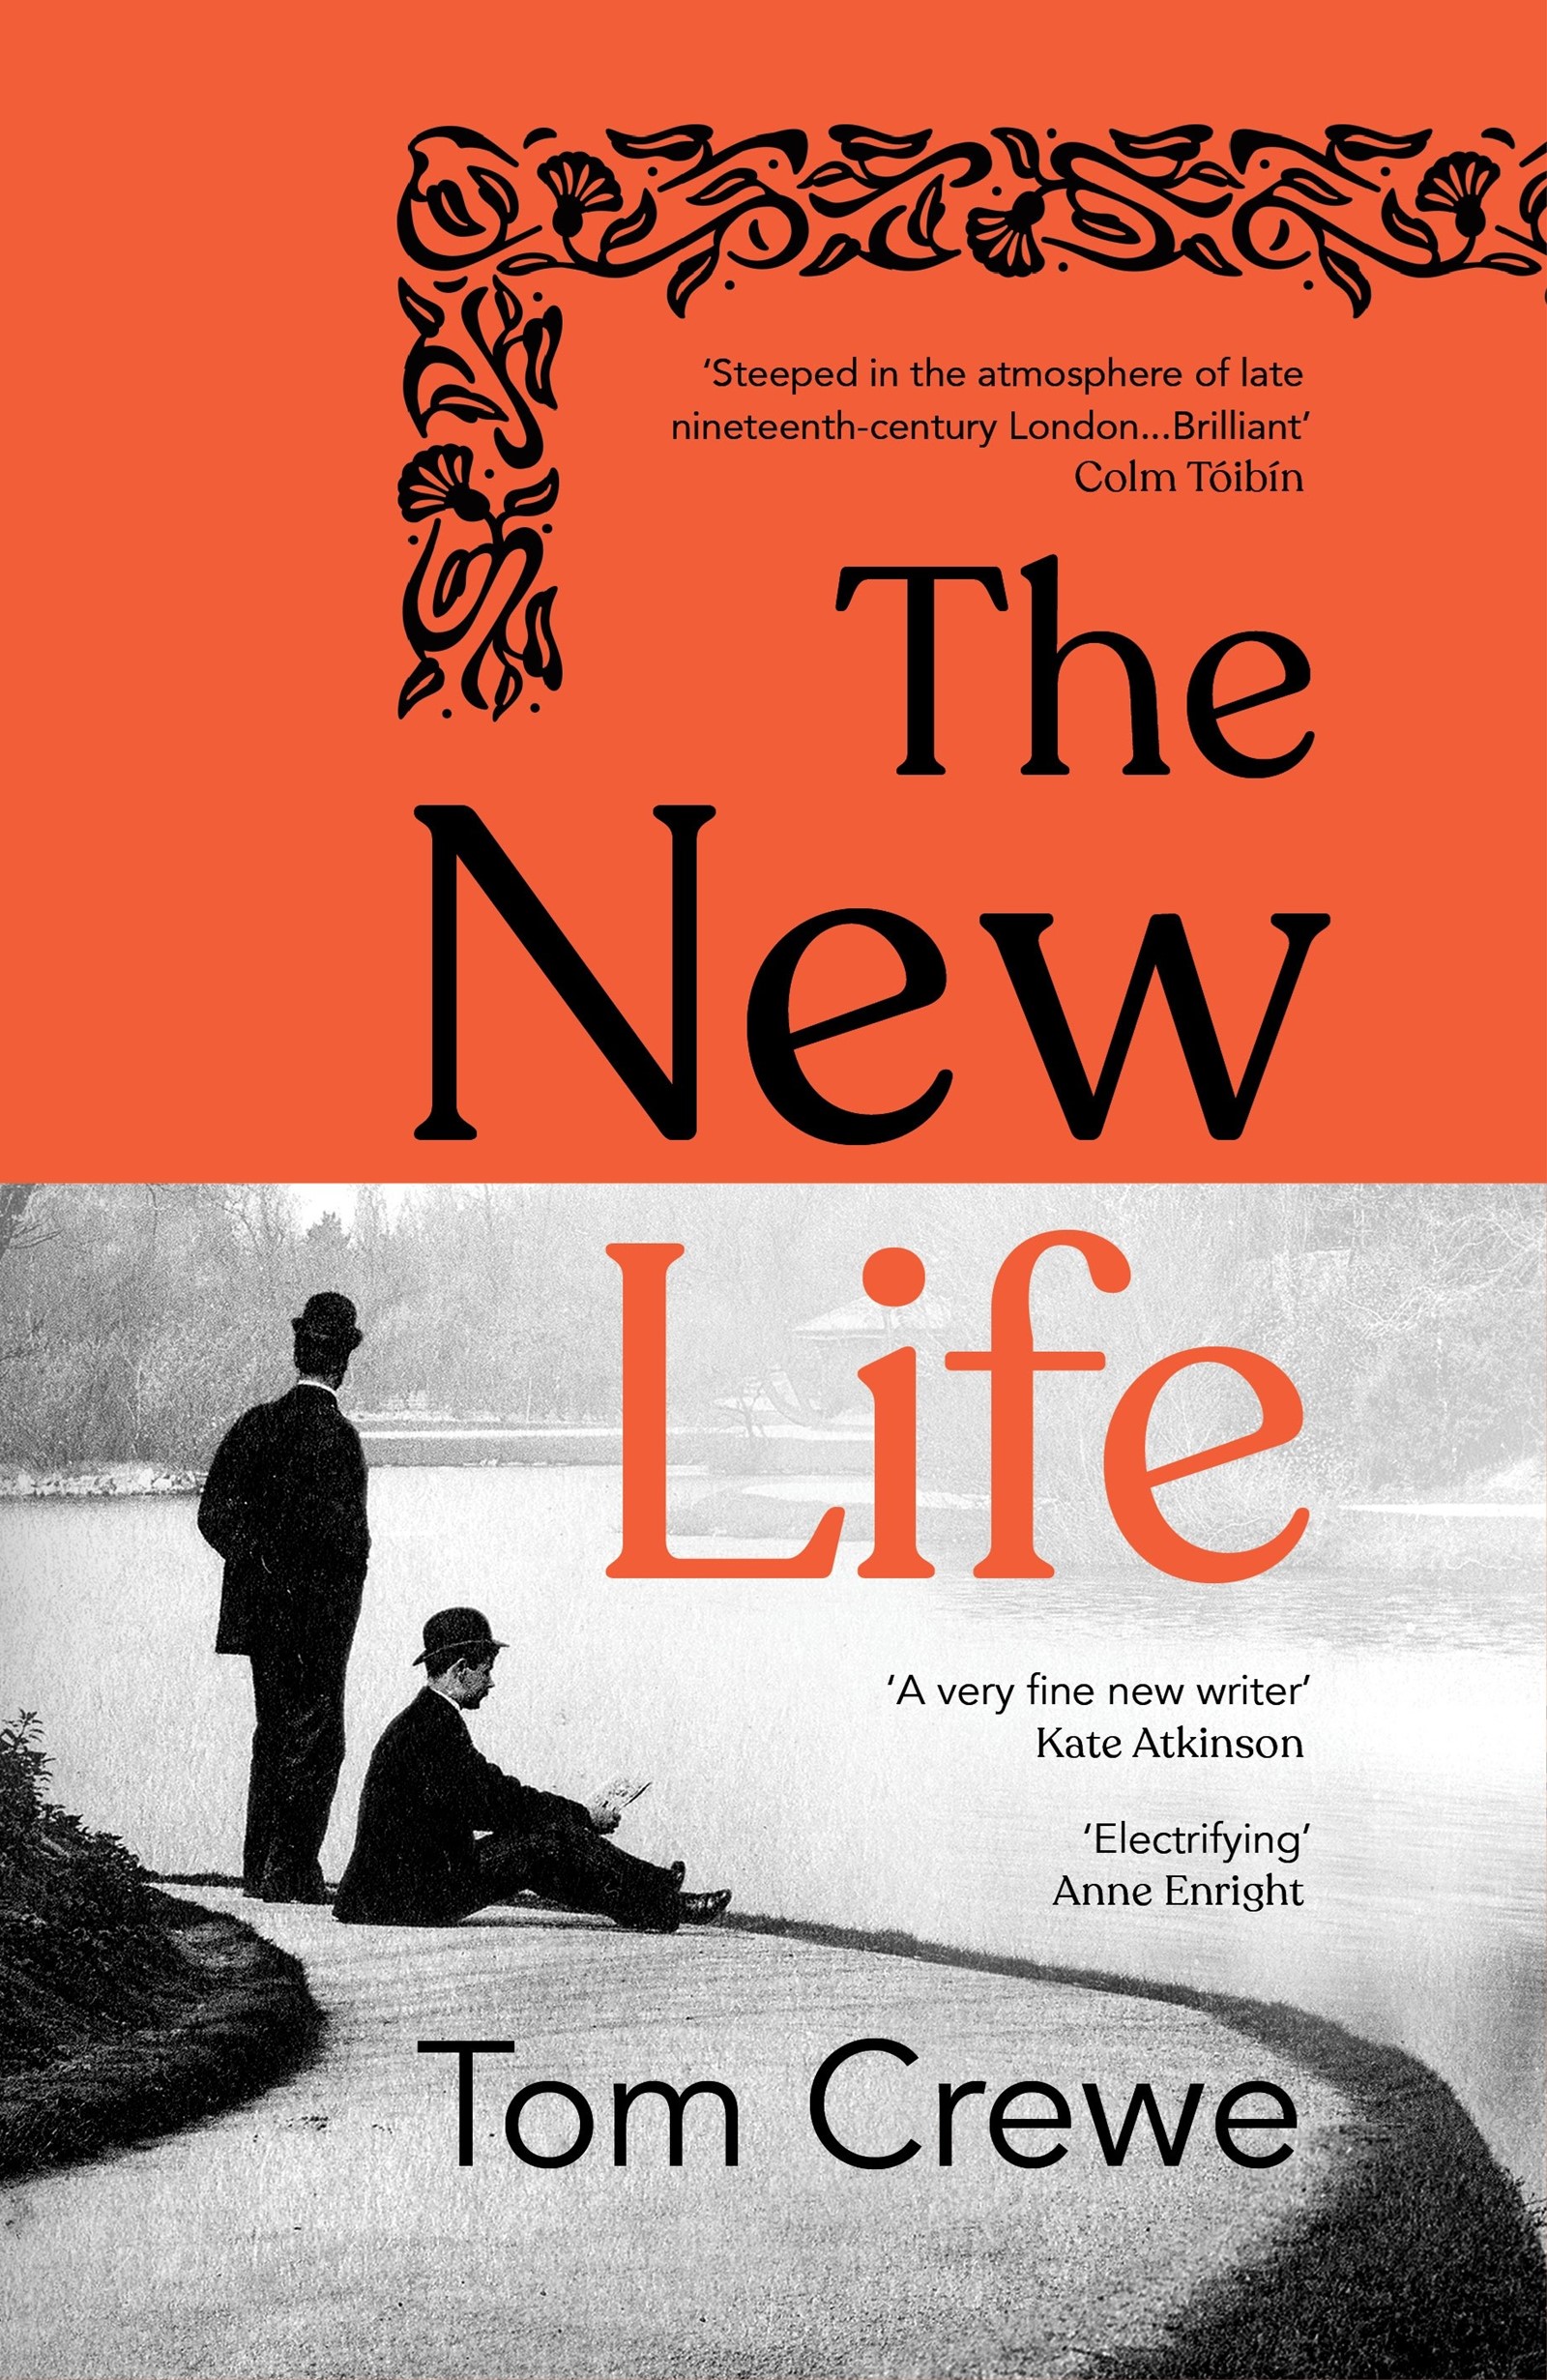 The New Life by Tom Crewe